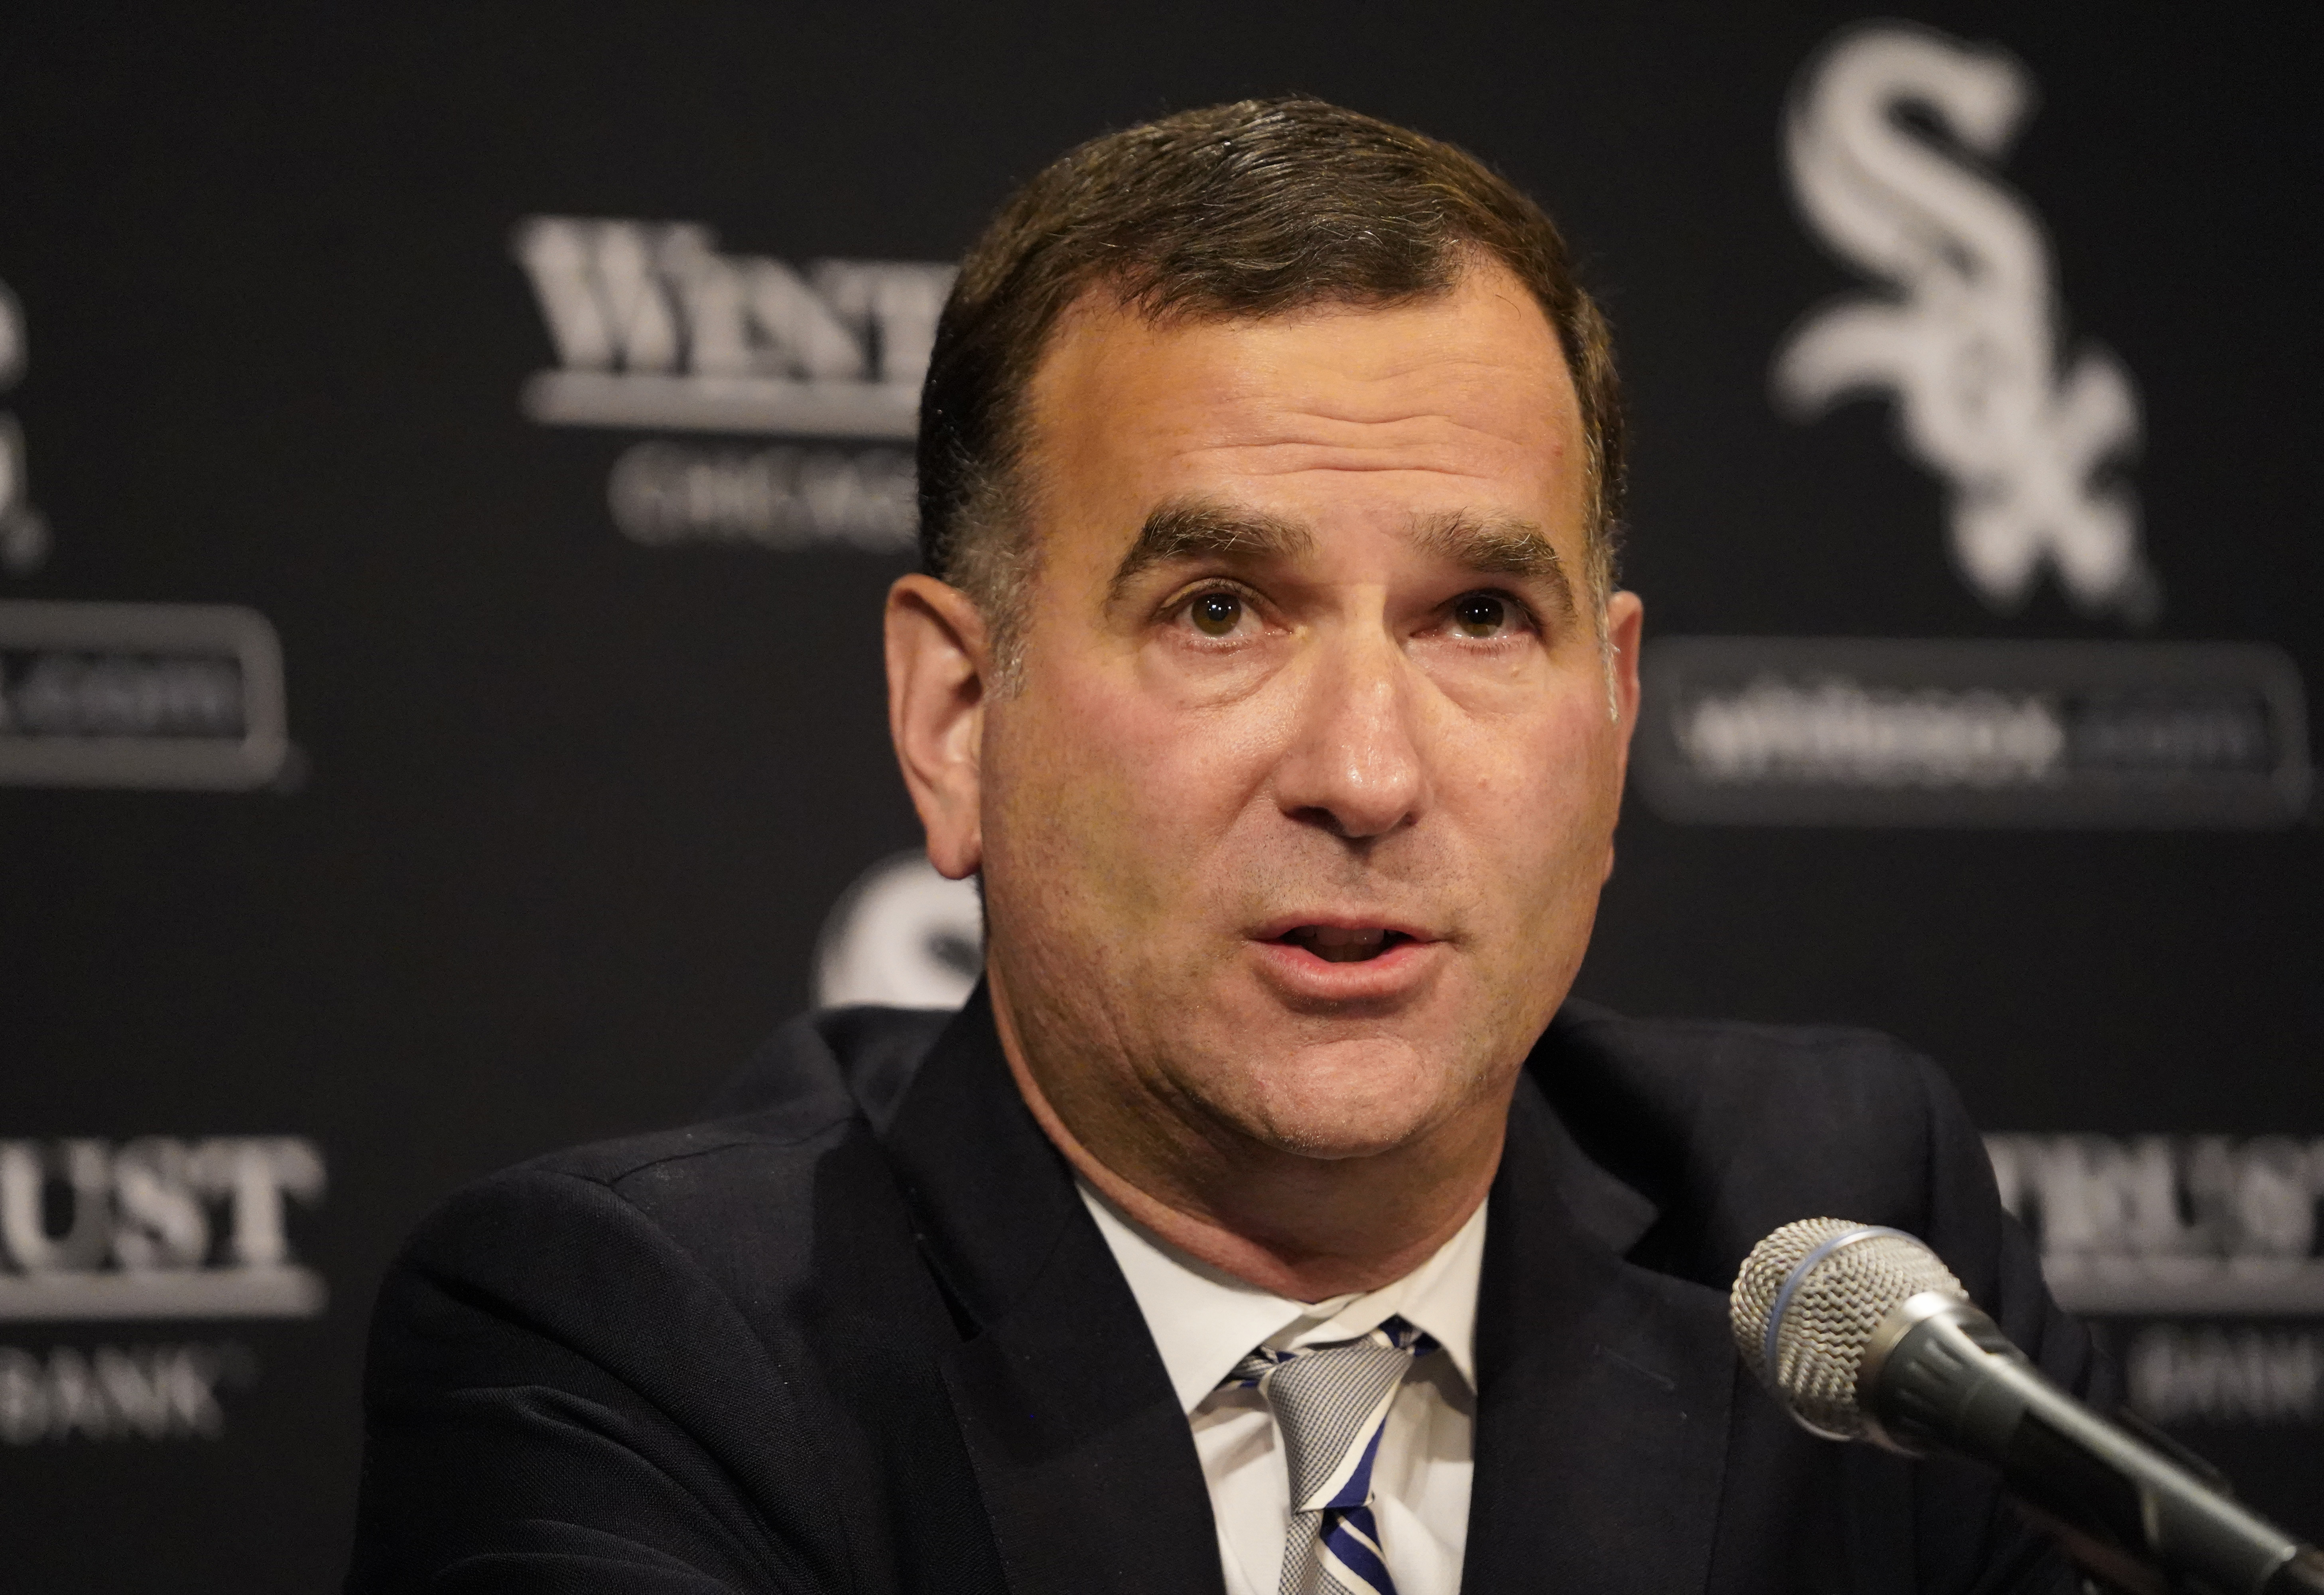 MLB: Chicago White Sox-Press Conference